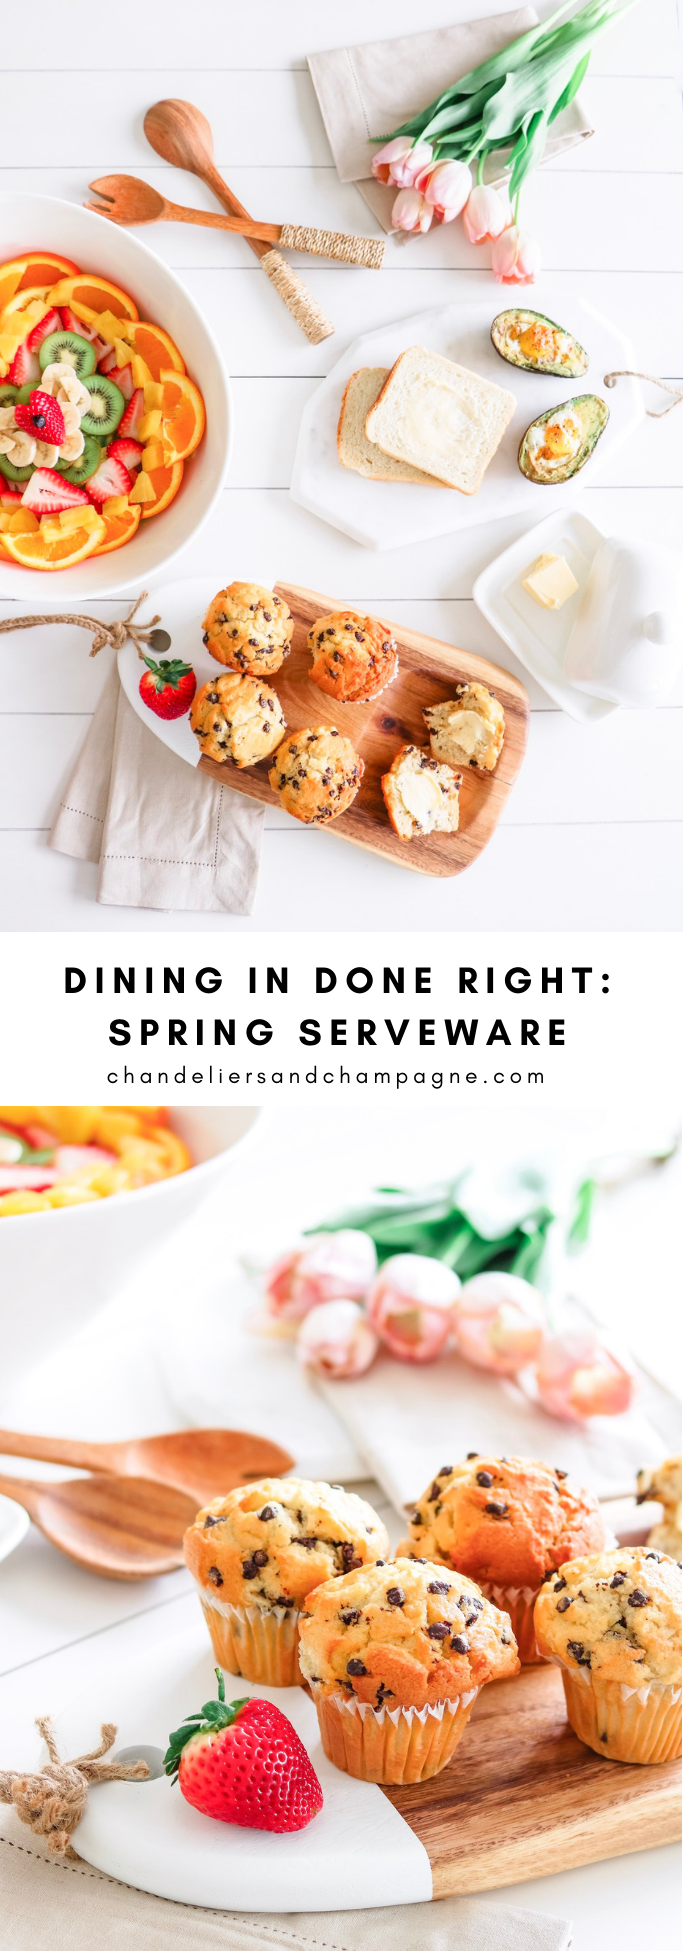 Spring serveware in crisp white and warm wood: dining in done right